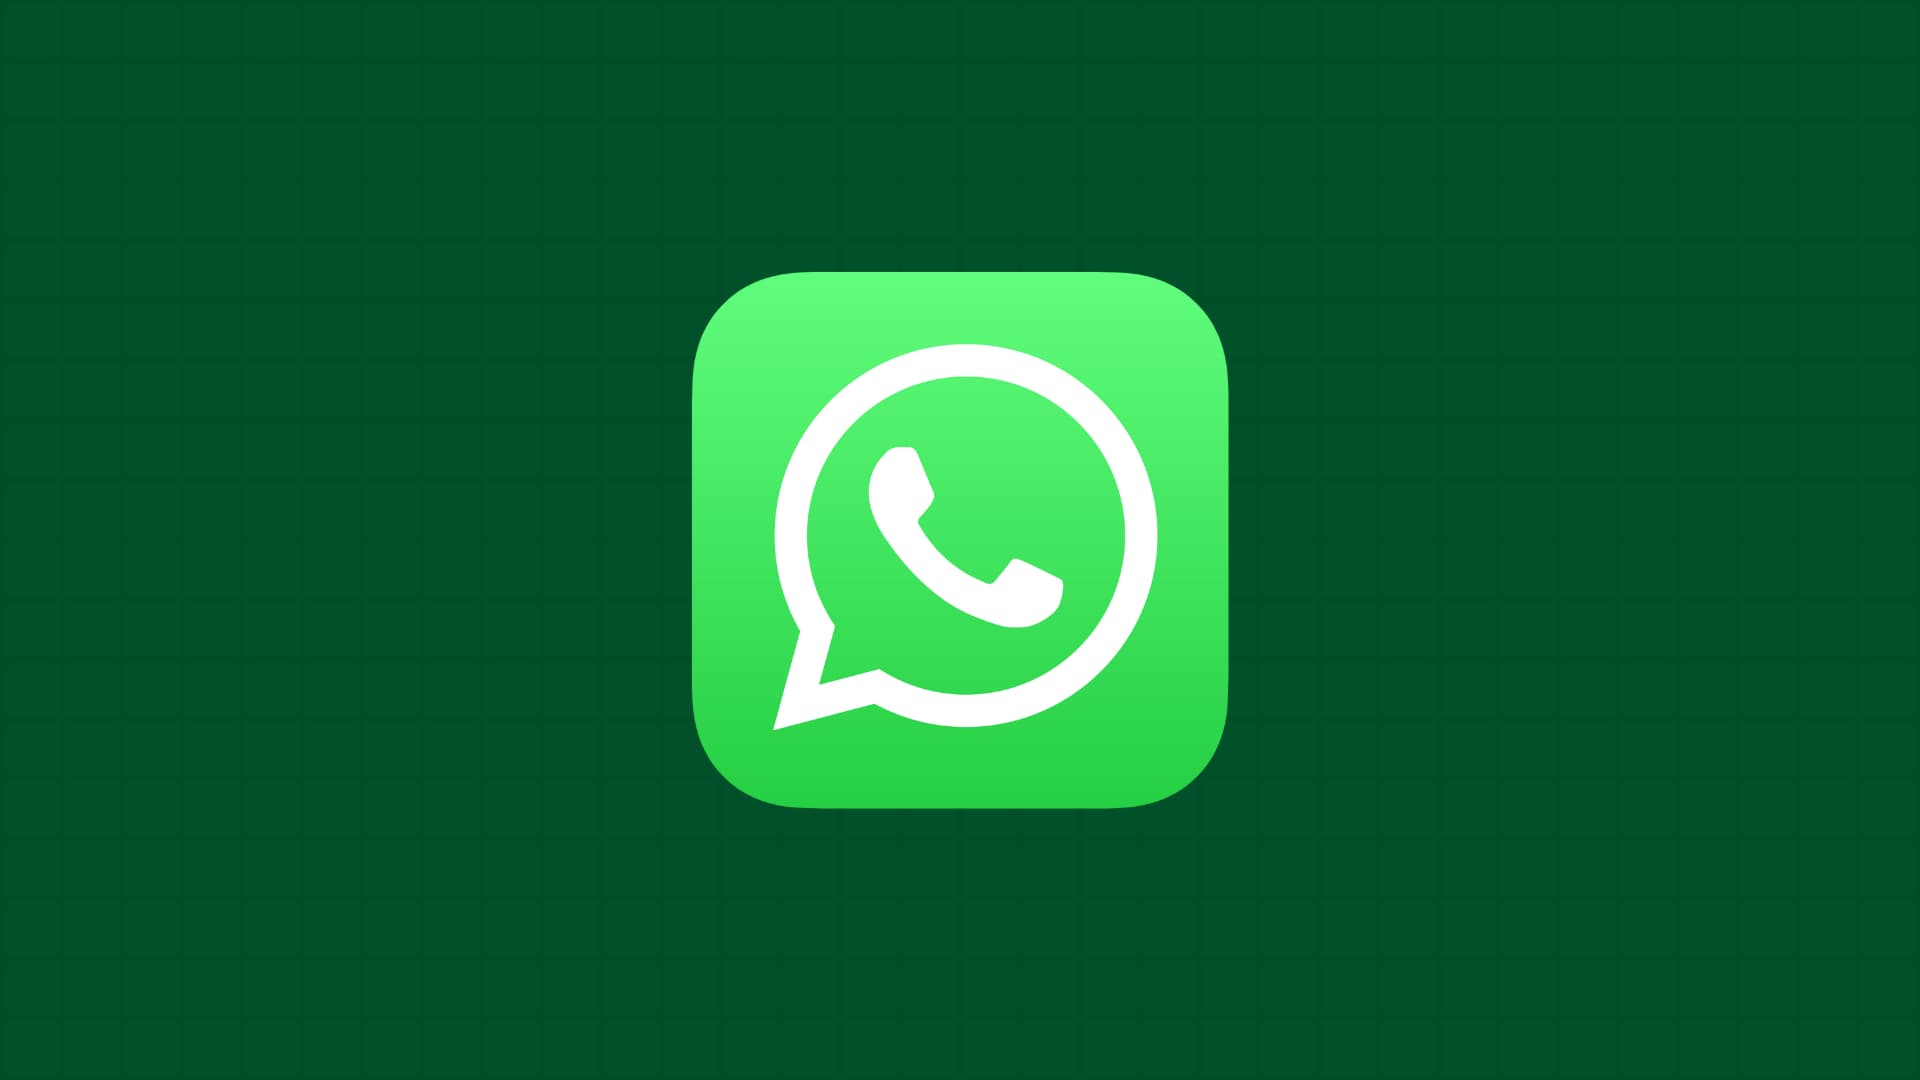 WhatsApp icon on a green background